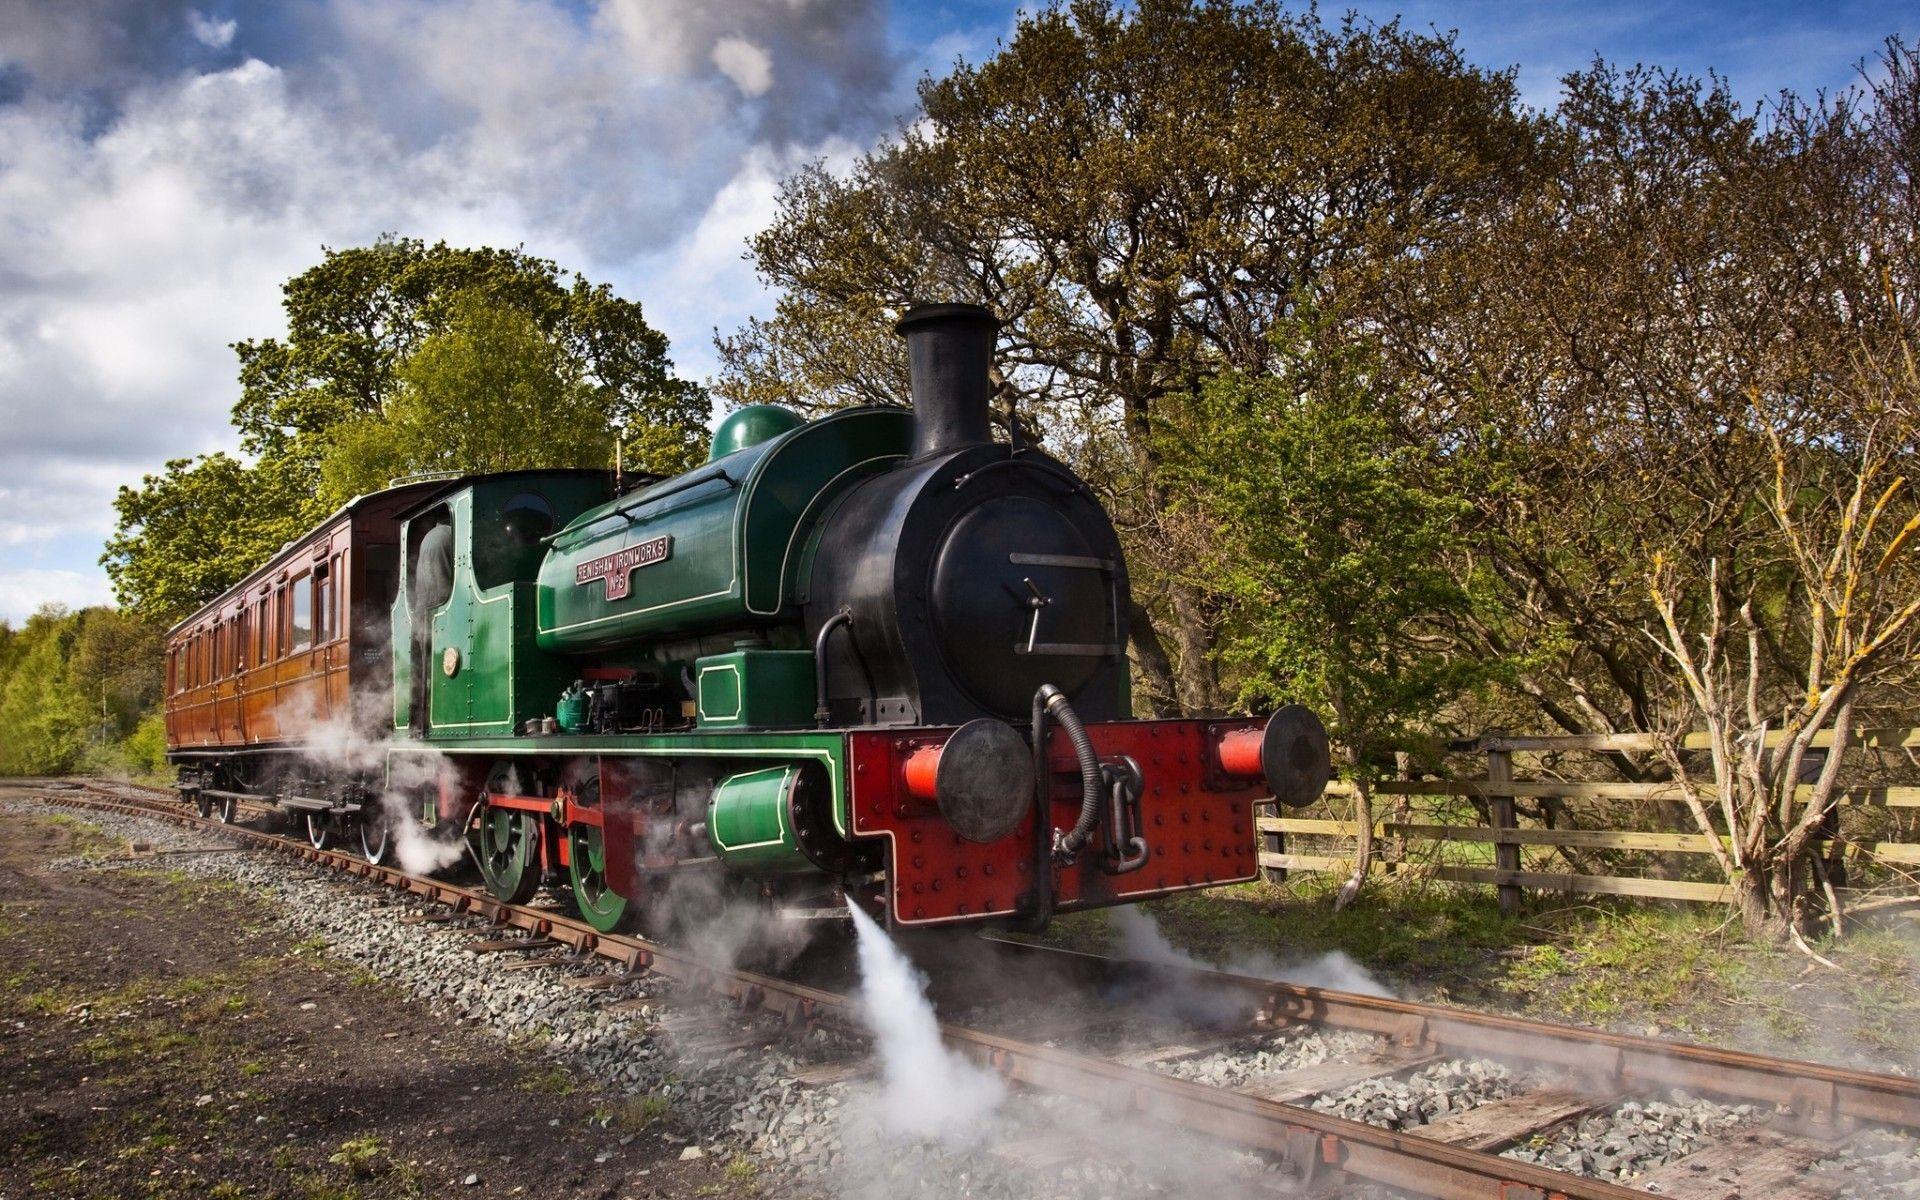 Steam Trains Wallpapers Wallpaper Cave